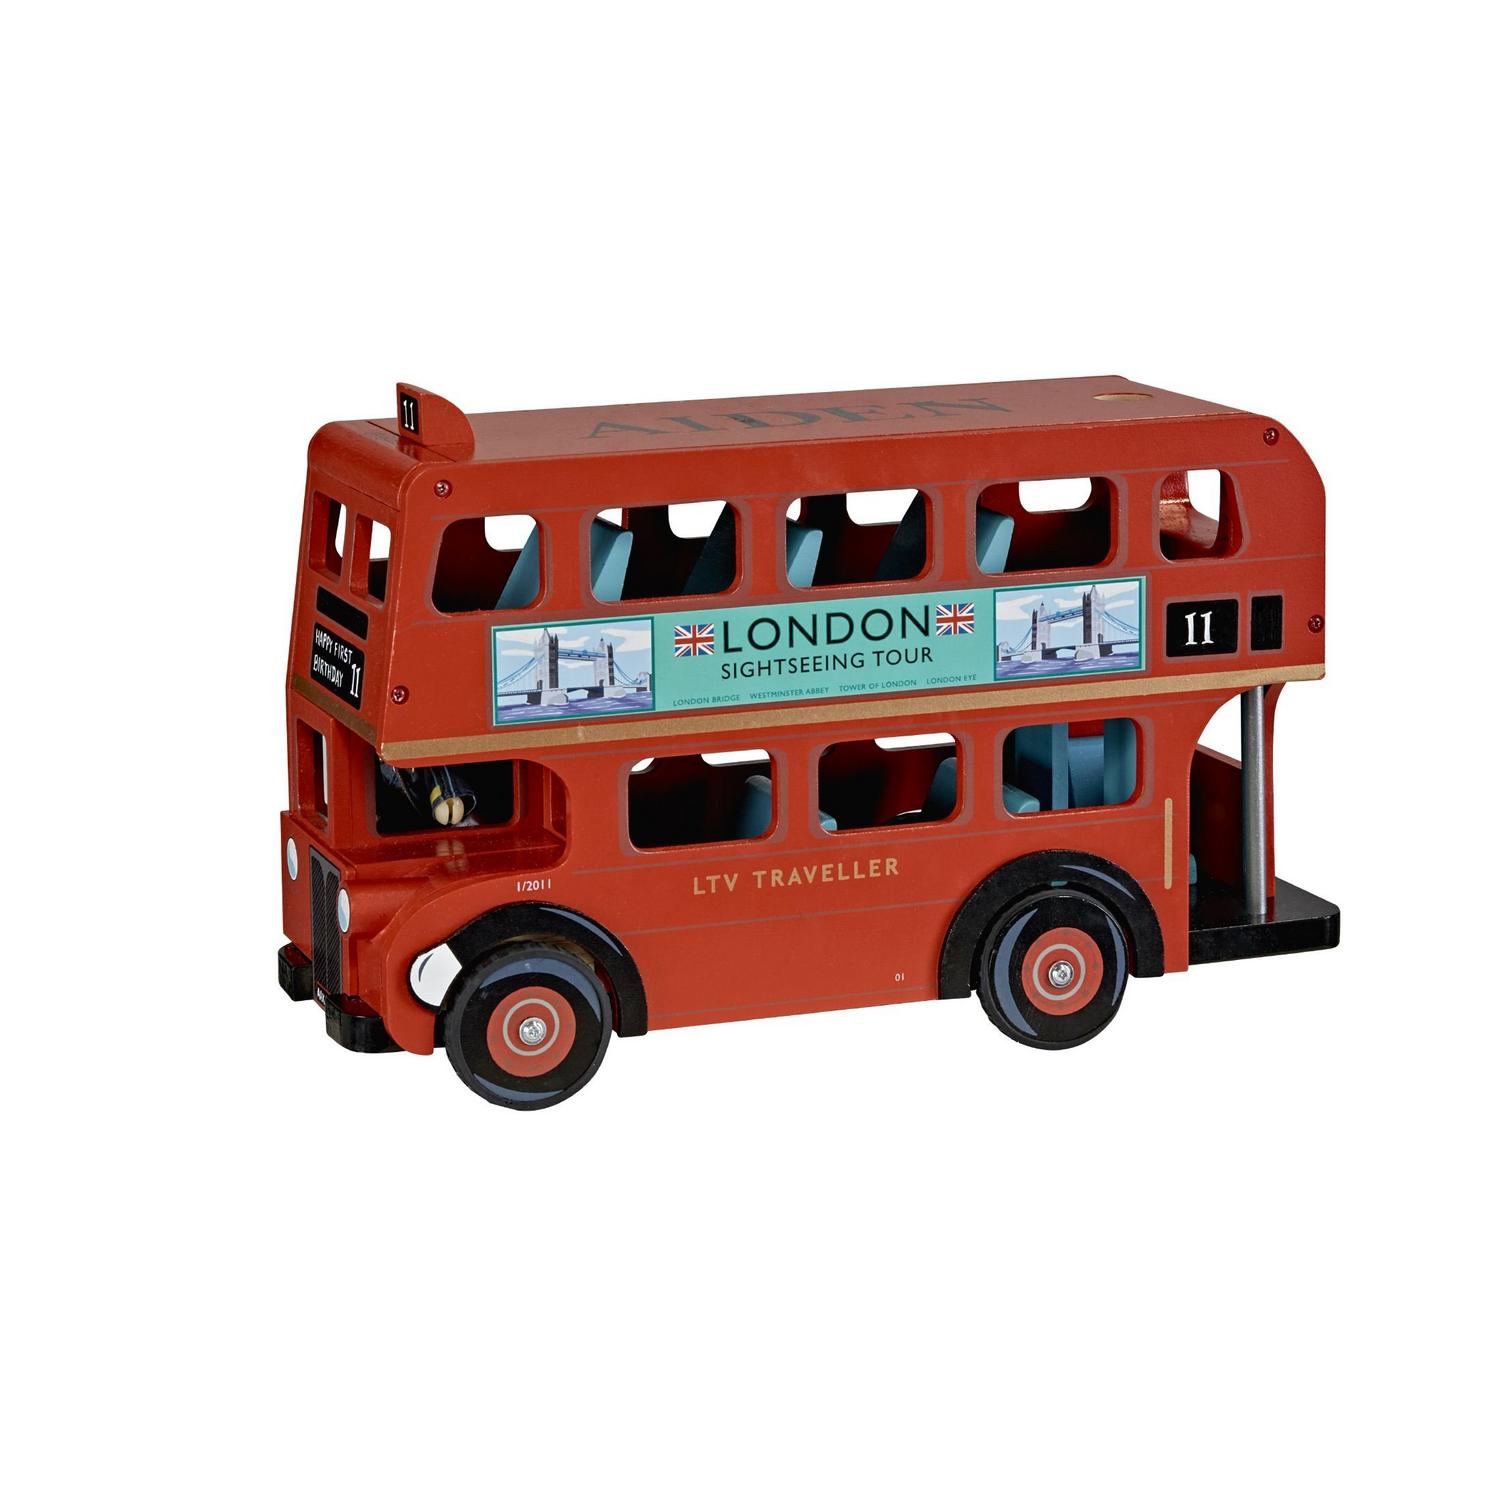 London Bus with Personalised Name - London Bus with Personalised Name